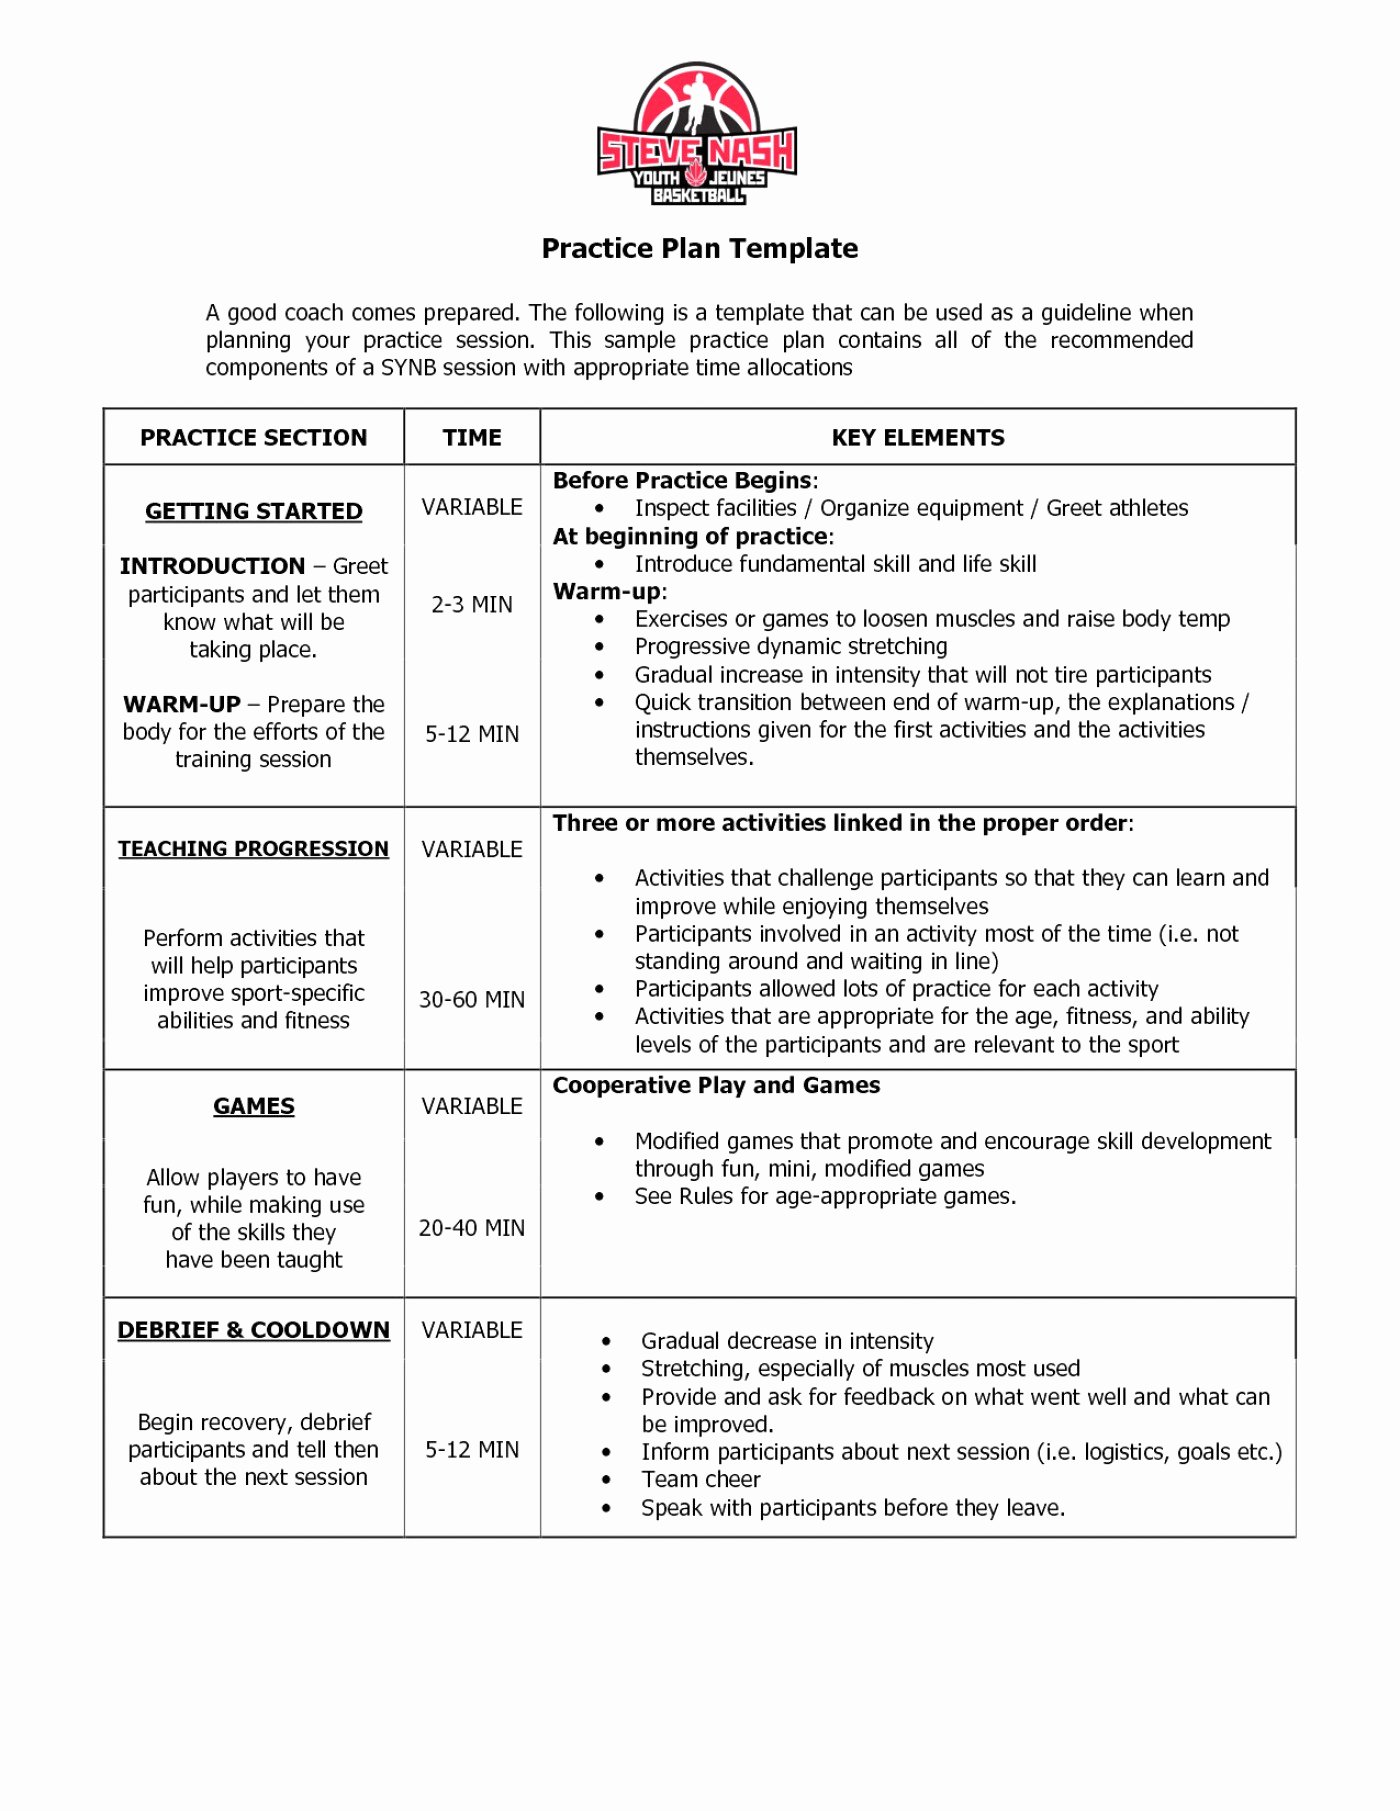 Football Practice Plan Template Excel New 010 softball Practice Plan Template Baseball Awesome